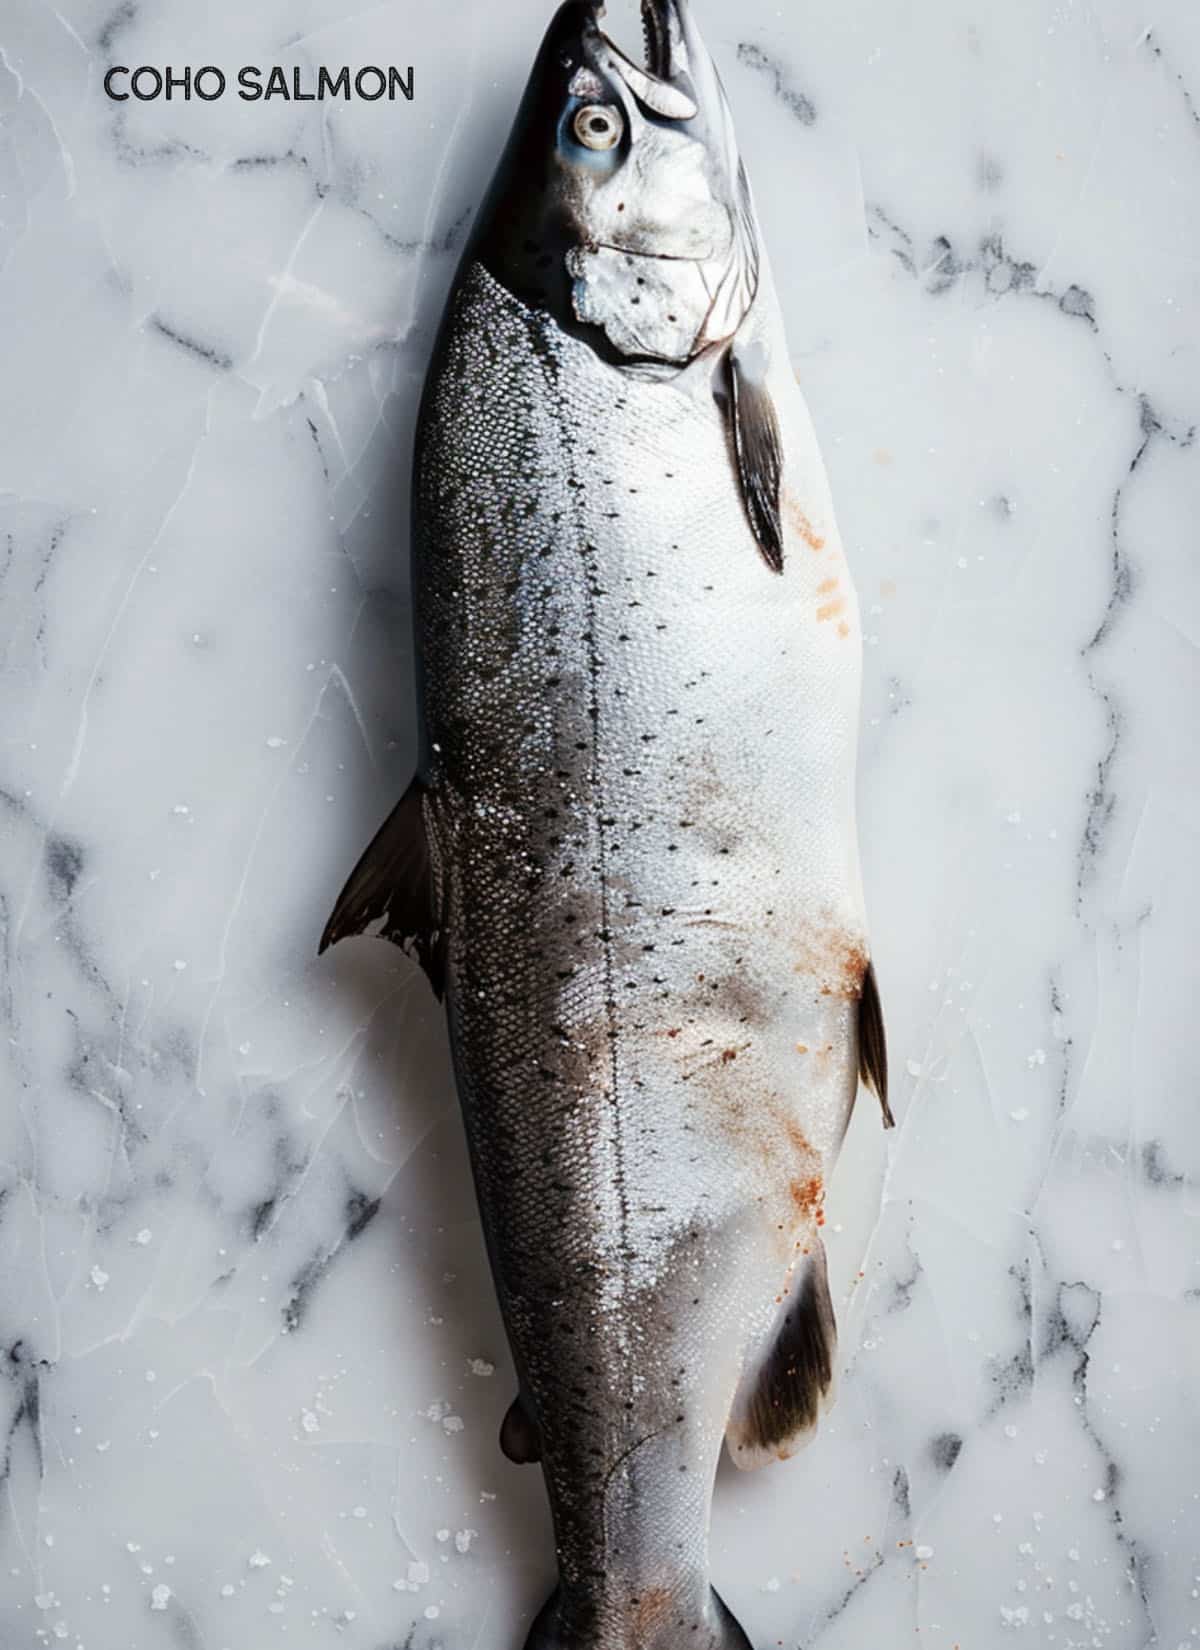 A close-up of a Coho salmon with its silver scales and hooked jaw.